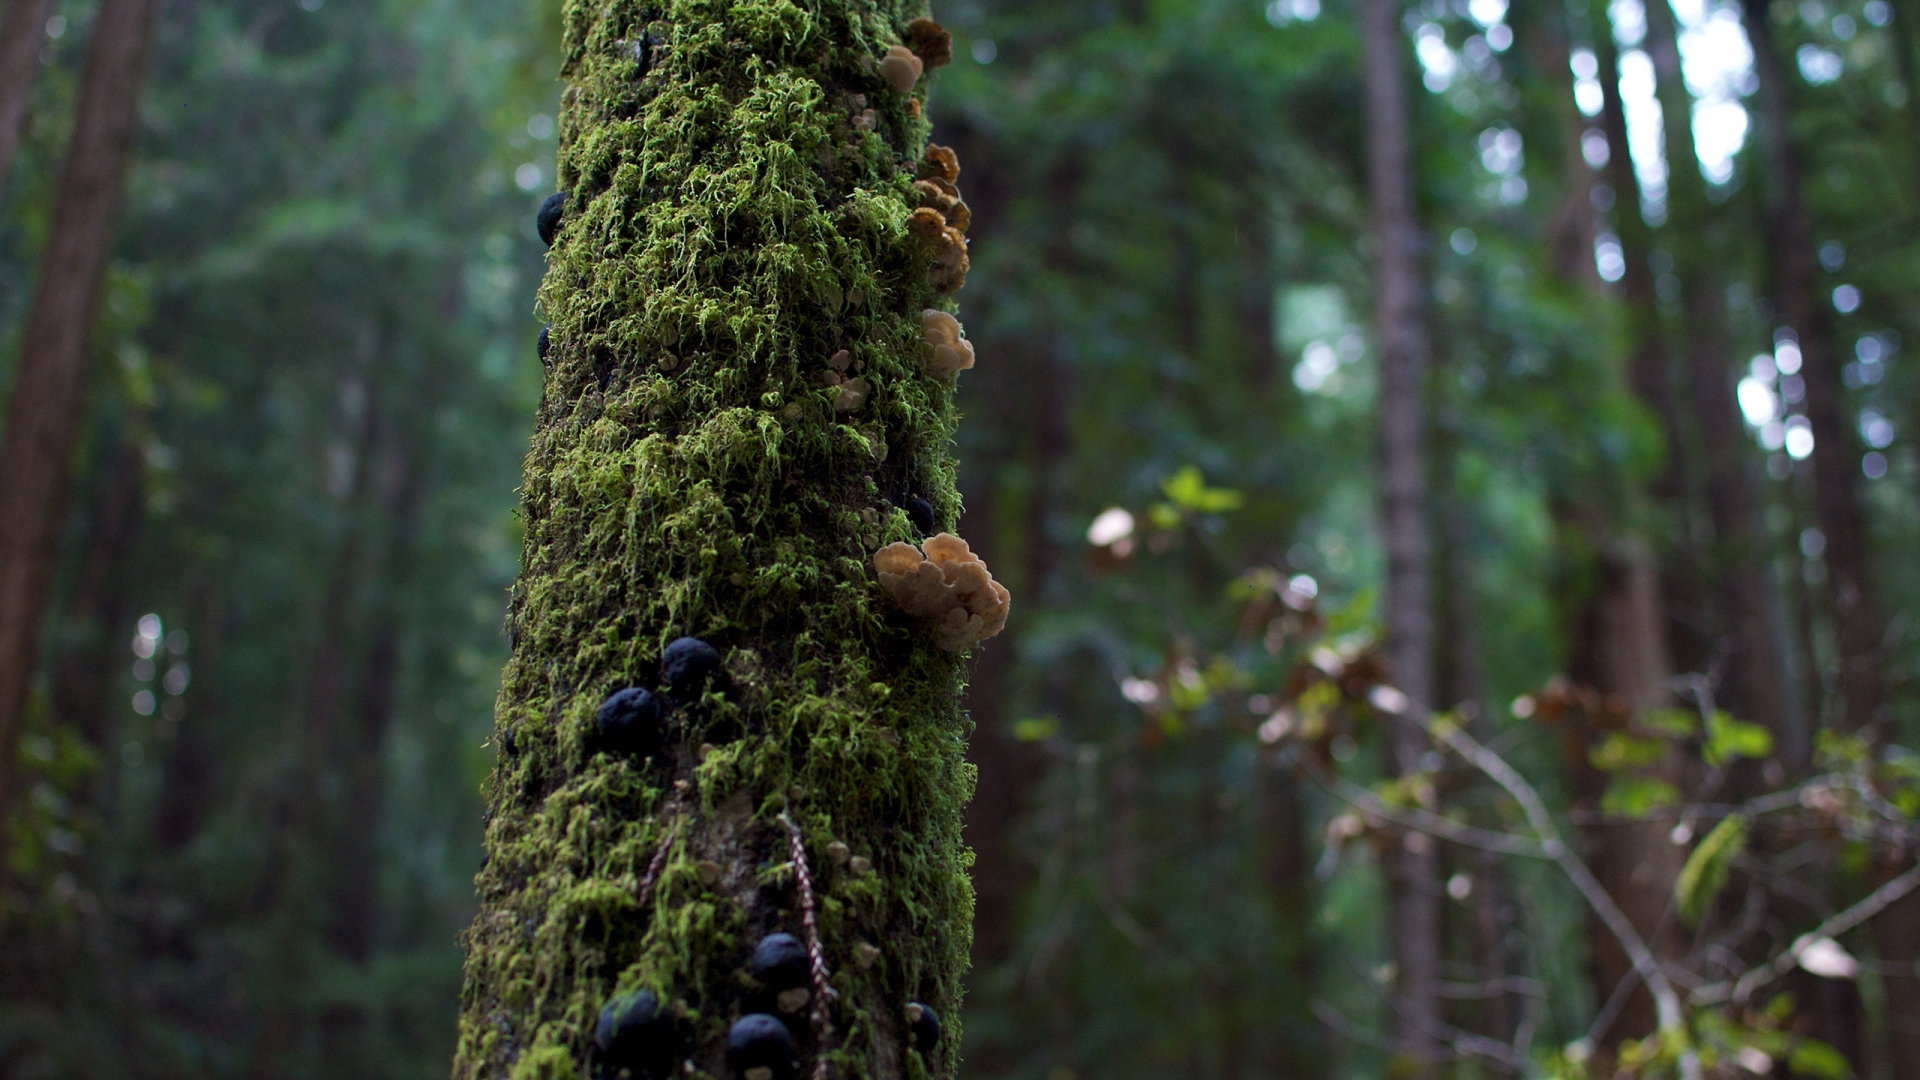 Tree Moss and Mushrooms for 1920 x 1080 HDTV 1080p resolution